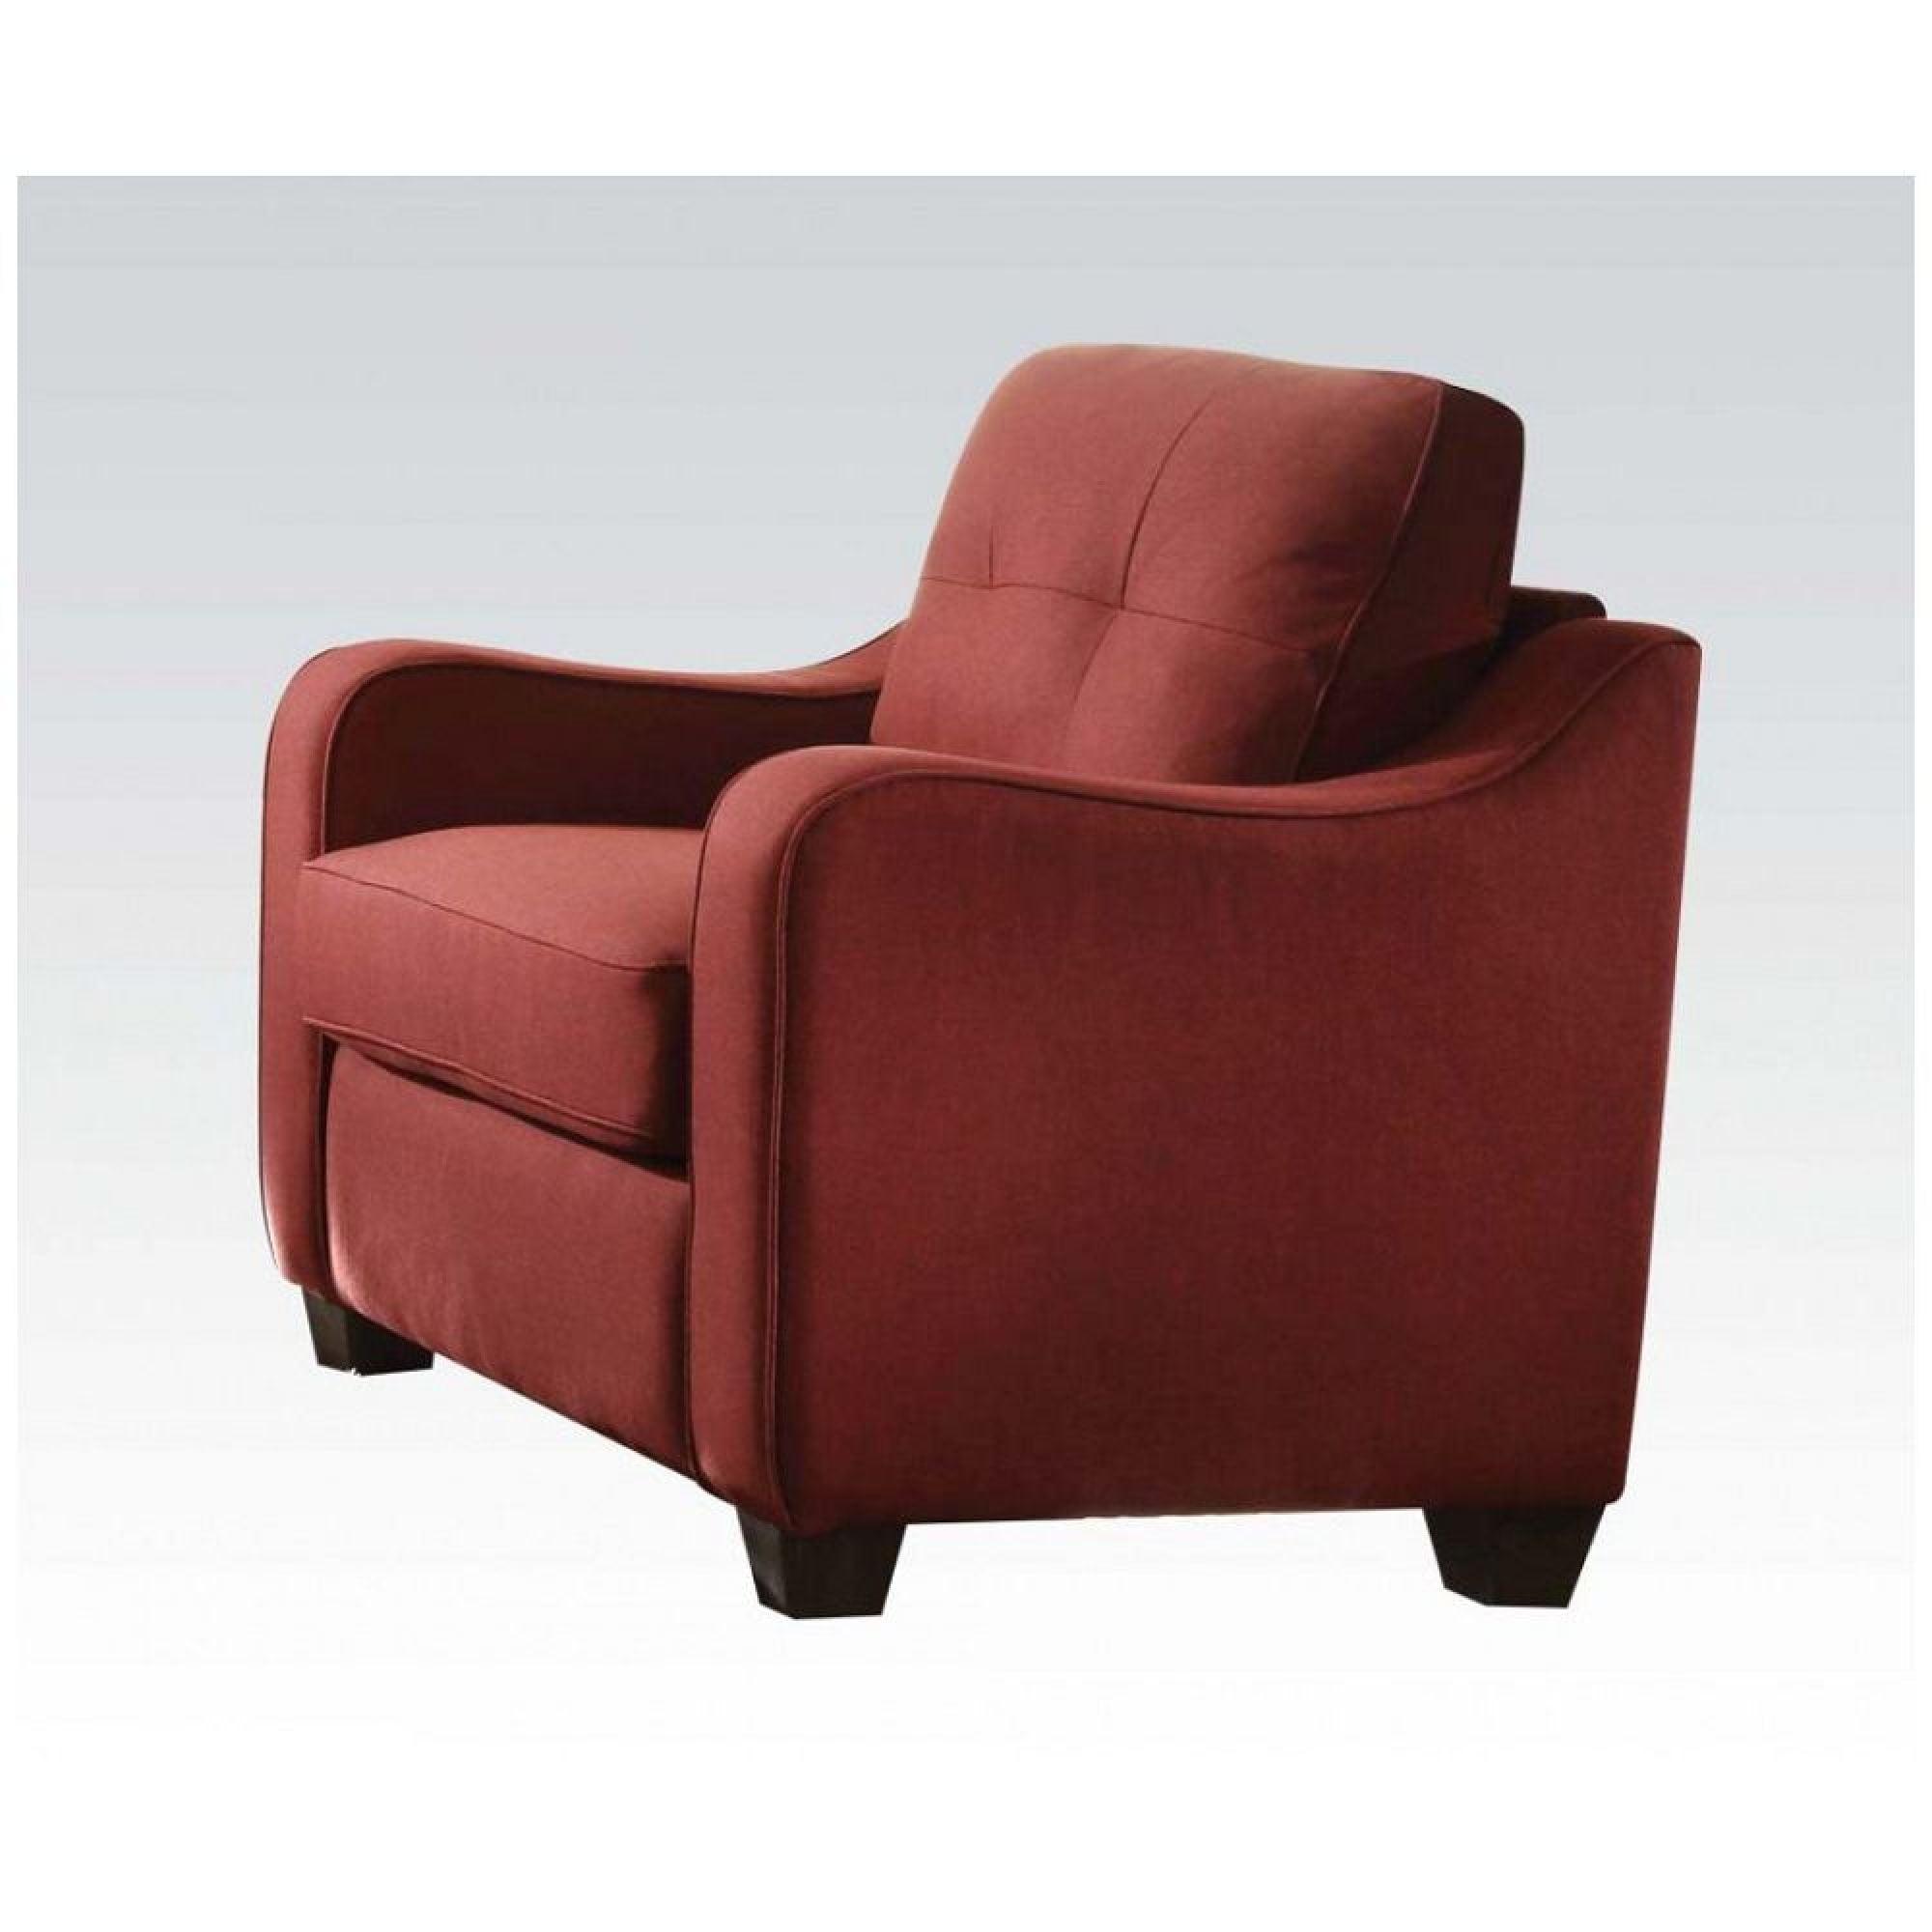 Cleavon II Modern Red Linen Chaise with Wood Grain Legs